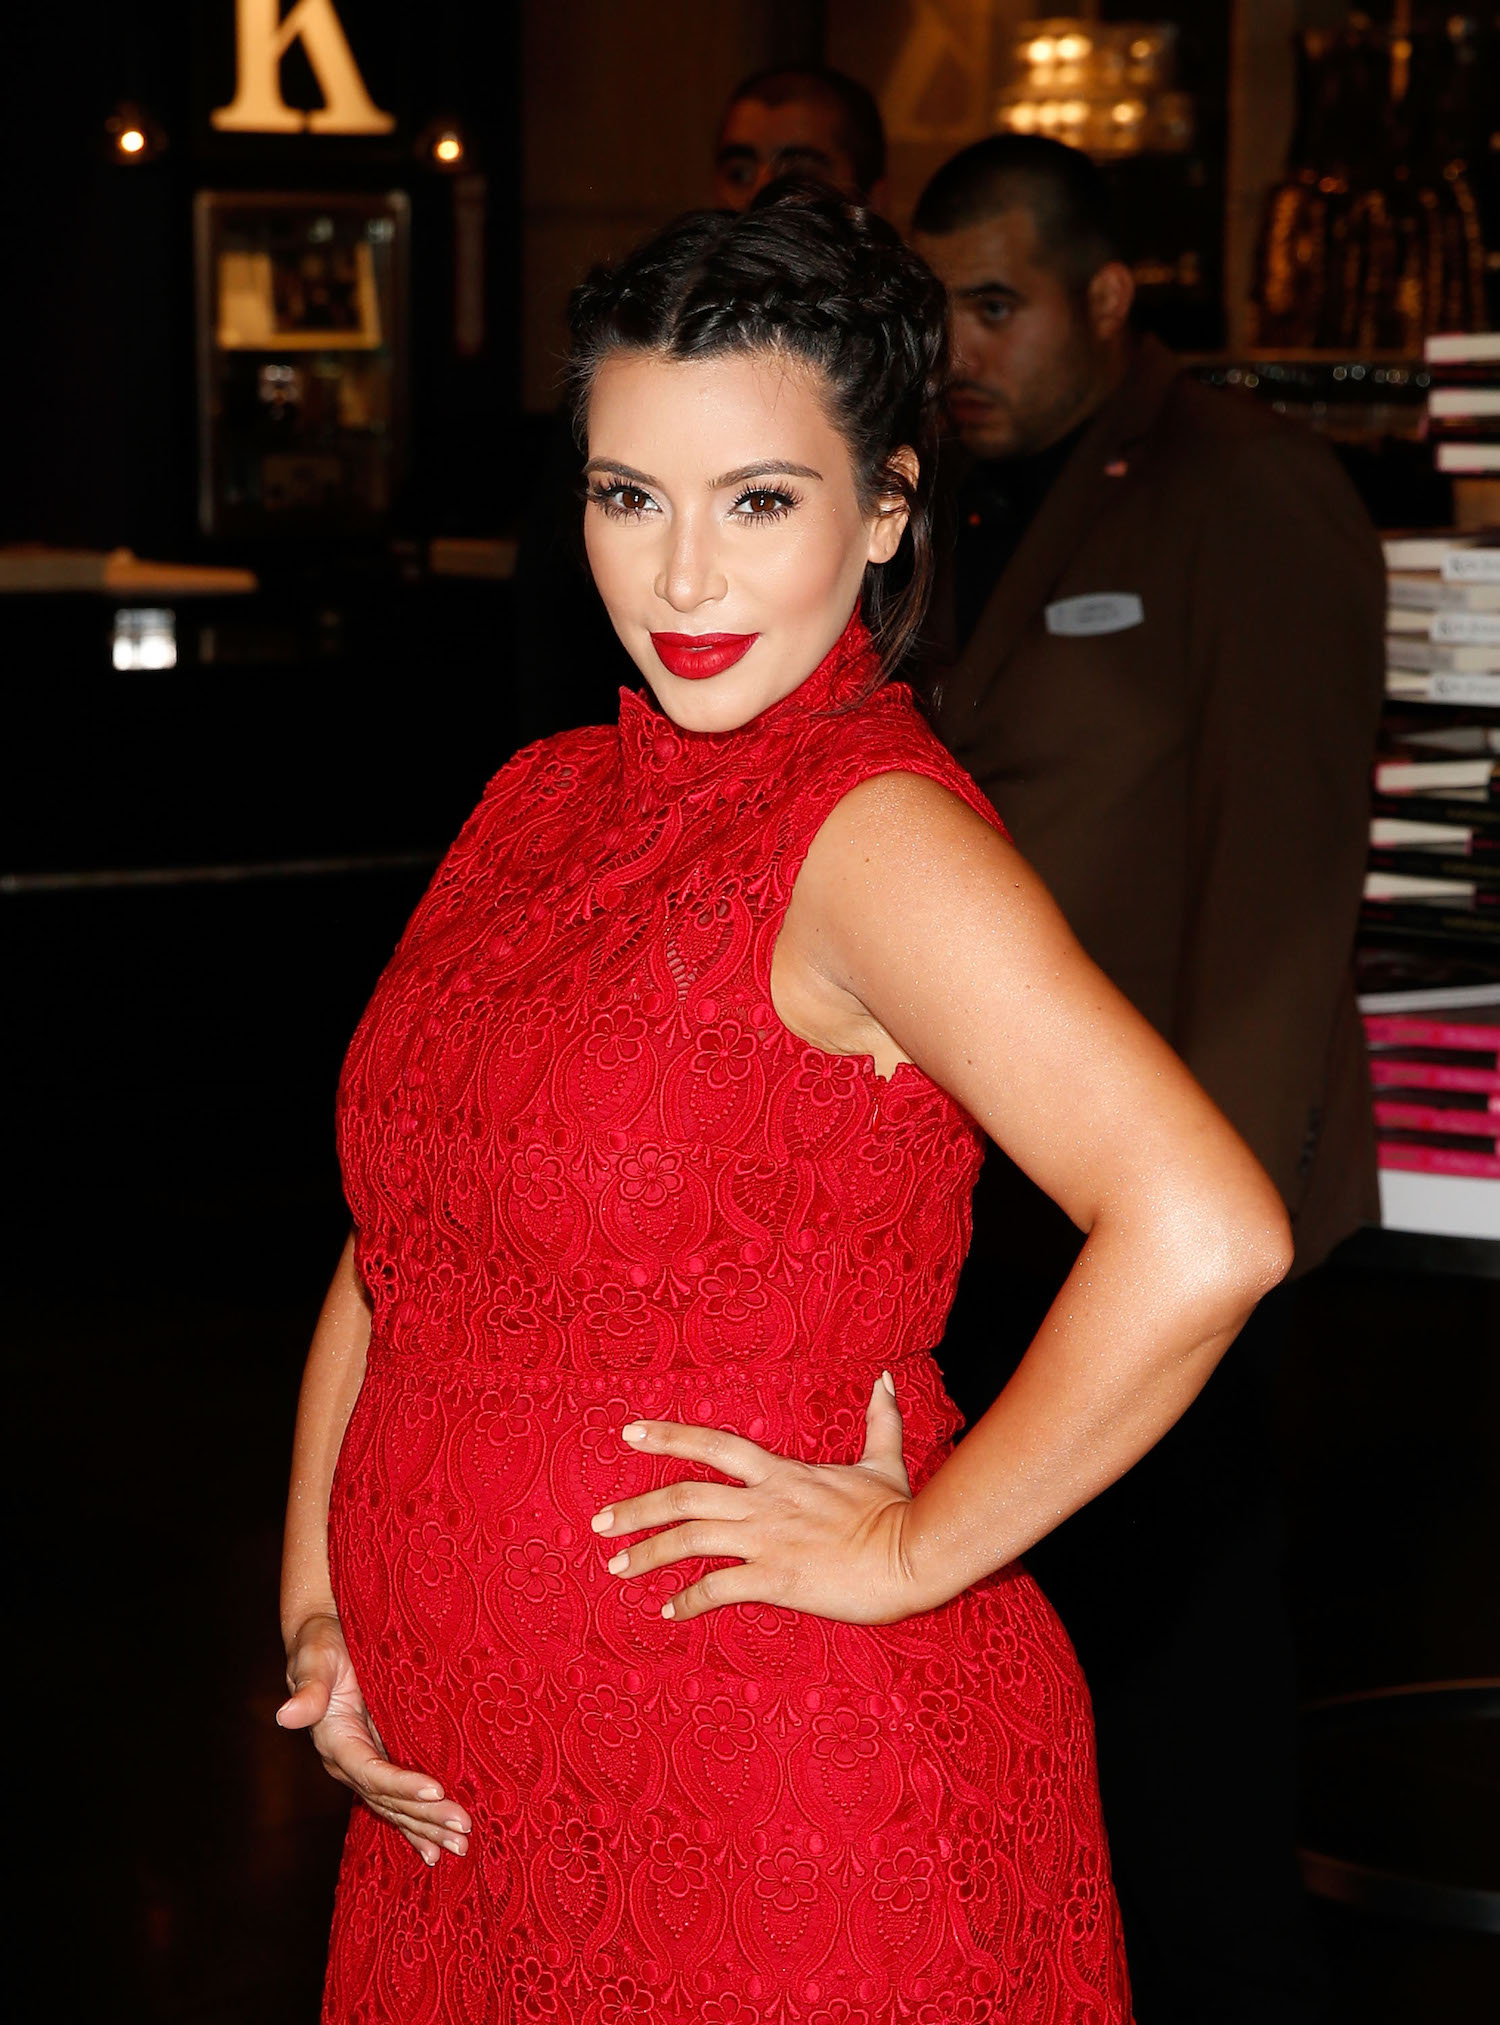 4. Kim Kardashian West in 2013 put the weight on the hips and bum ... and had a girl